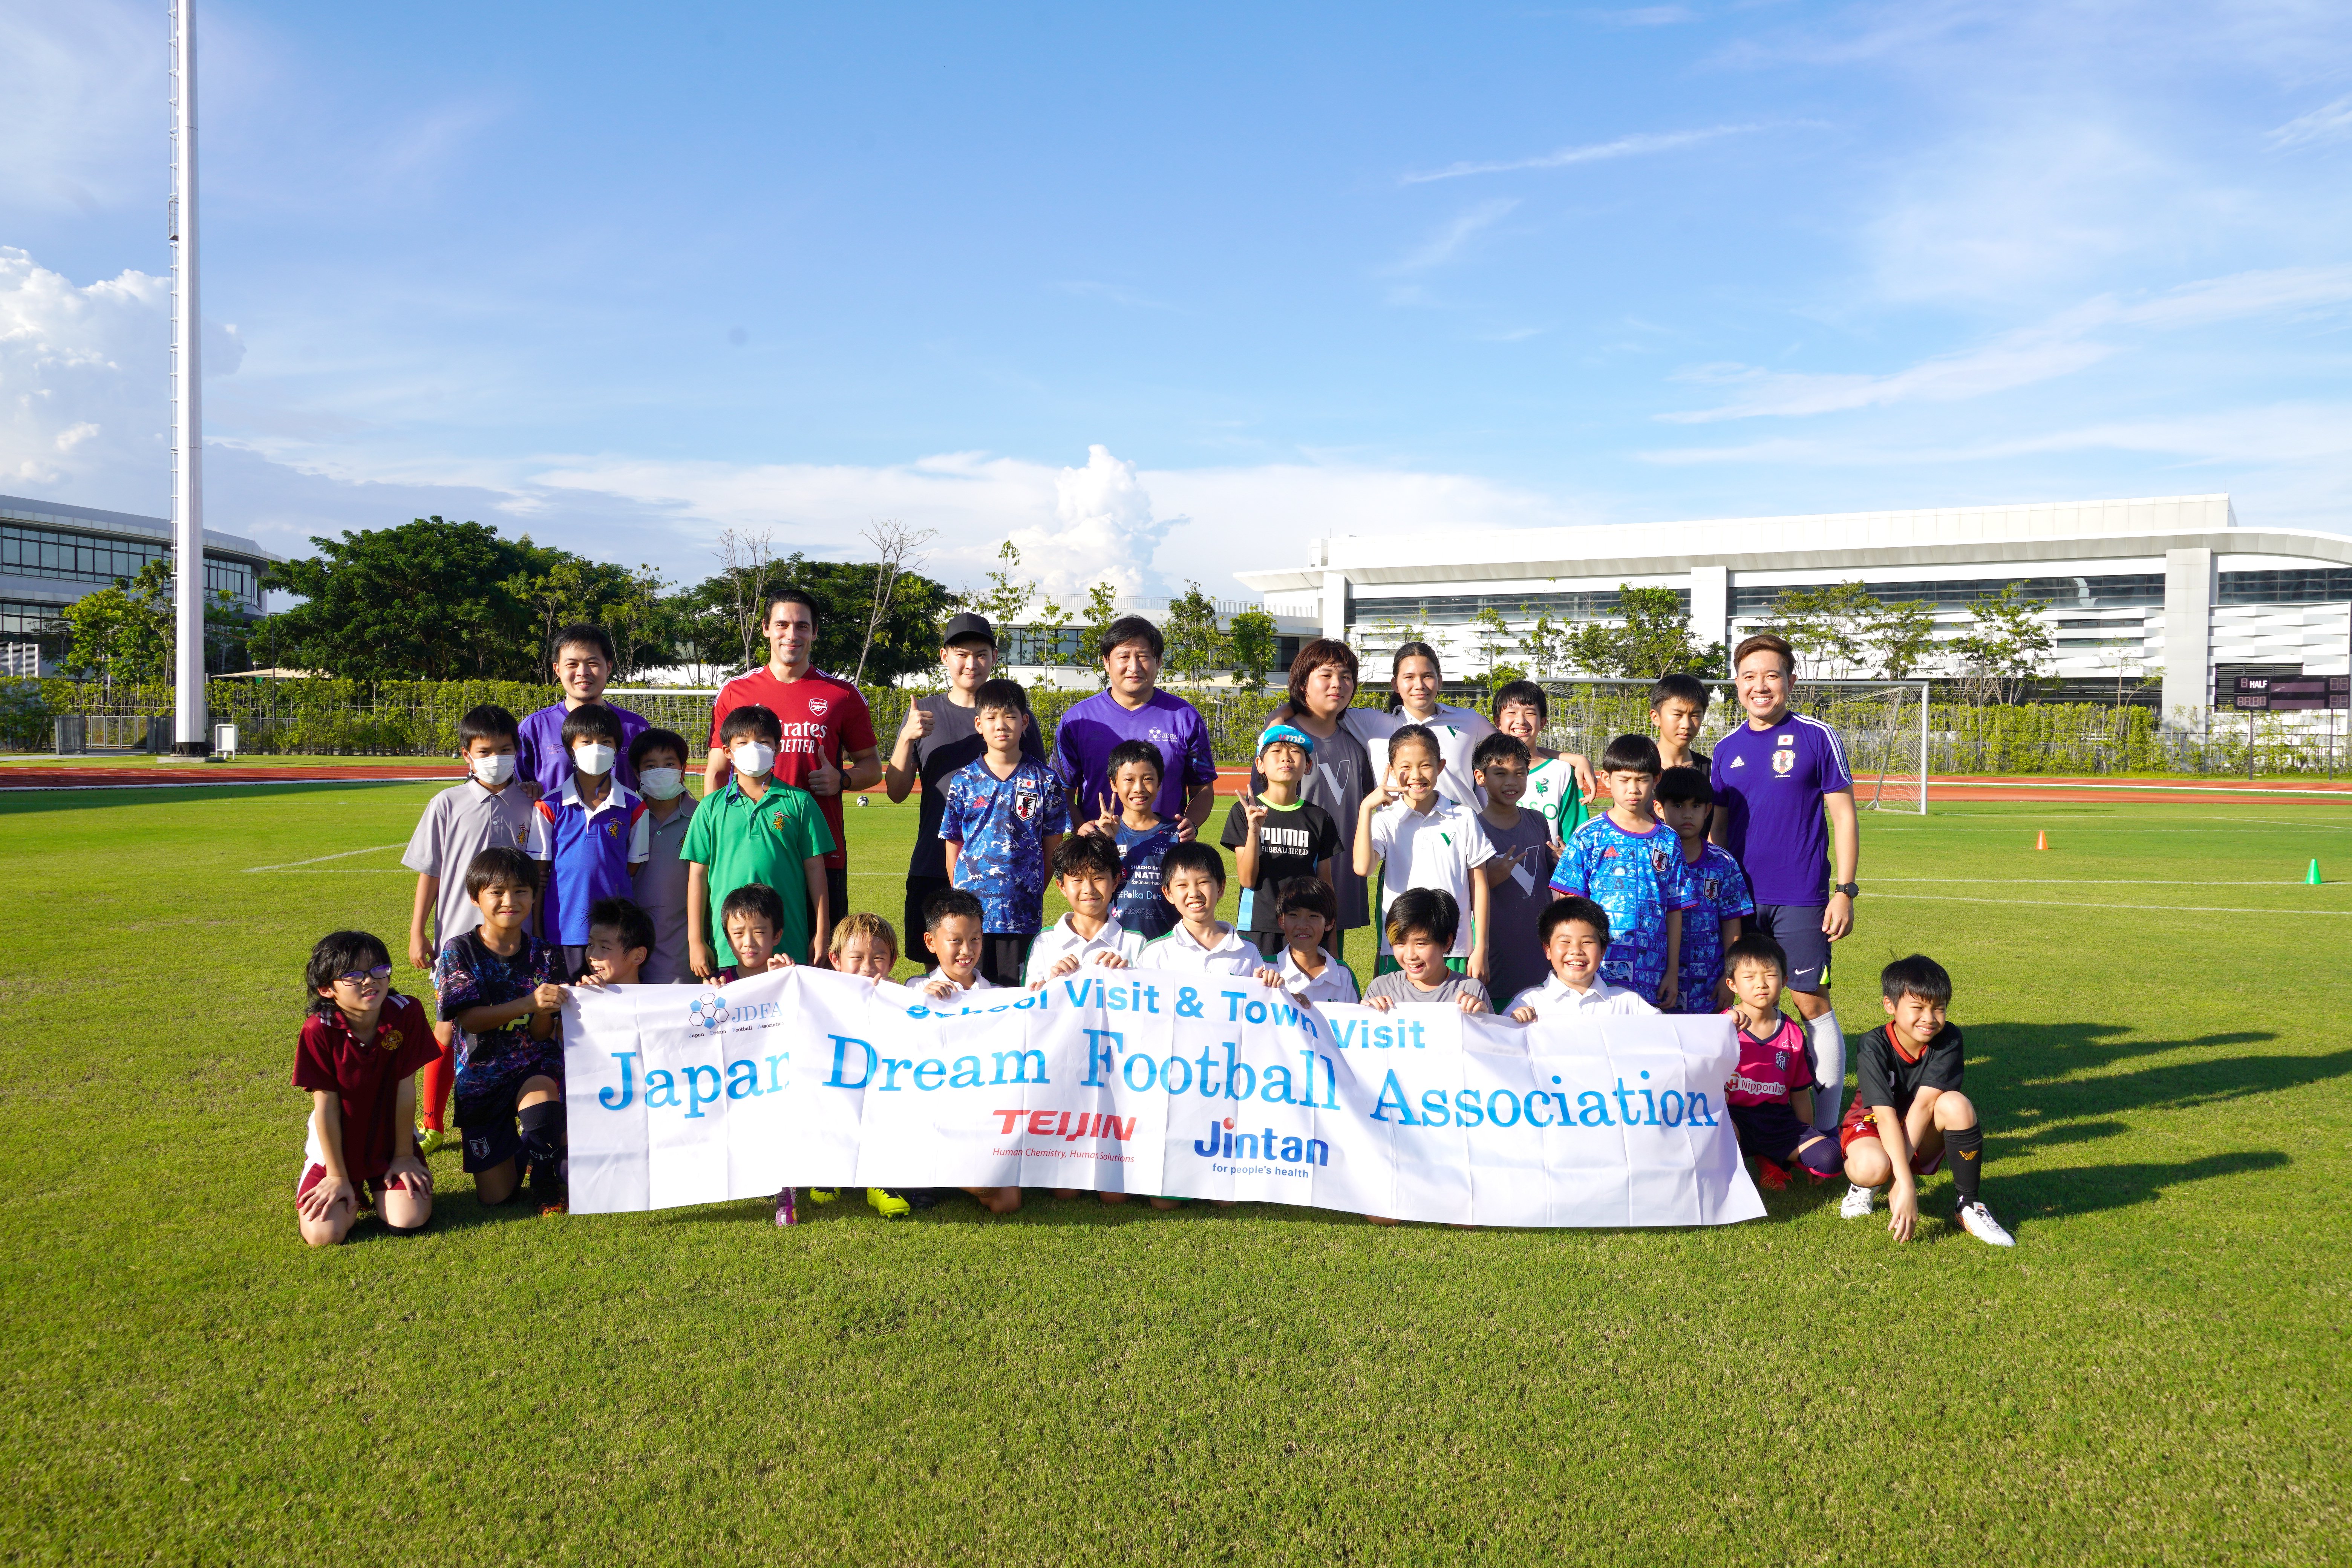 Masao Kiba(center) with Sami Yosef, VERSO Admissions Director (second left) Eakgapon Poyprakon, Sports Development Manager, VERSO (extreme right) with some of the players an an exclusive soccer skills clinic held at VERSO International School